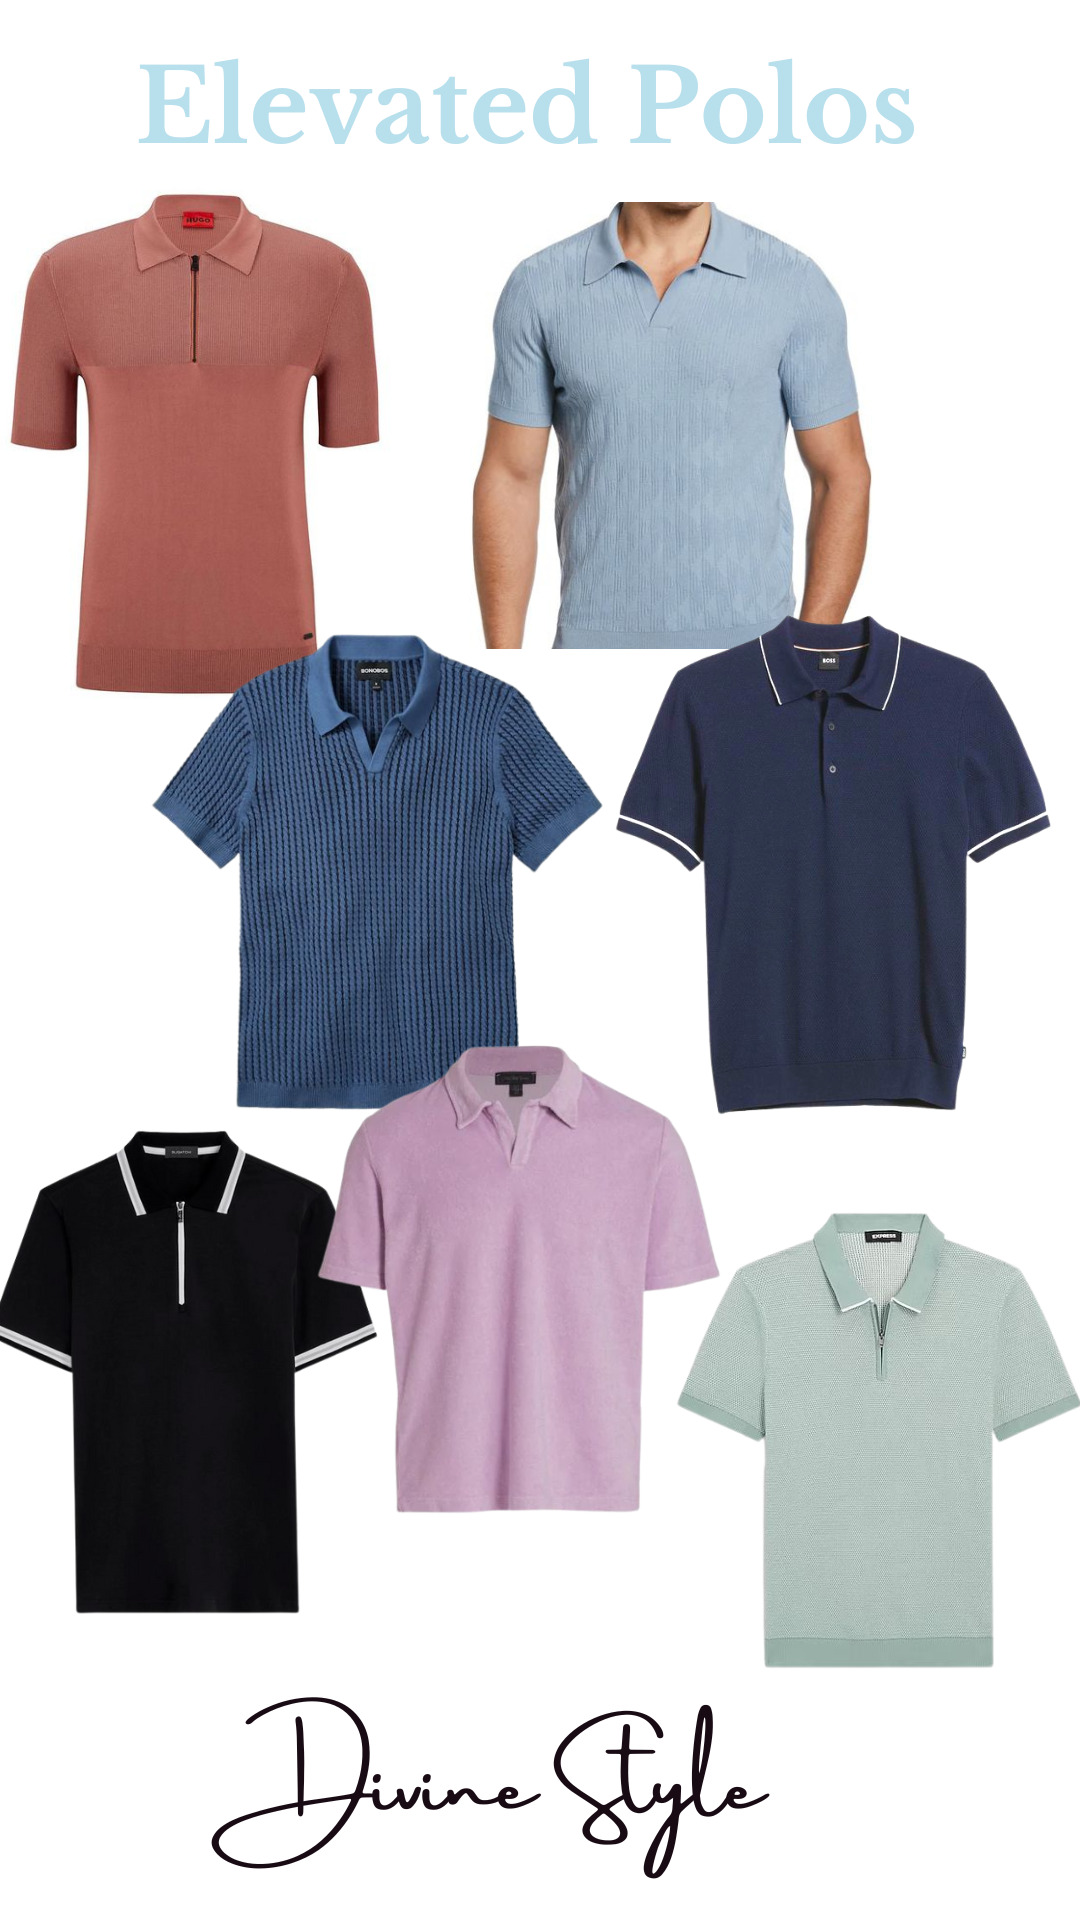 Spring Favorite Pieces for Men, men's elevated polo shirts